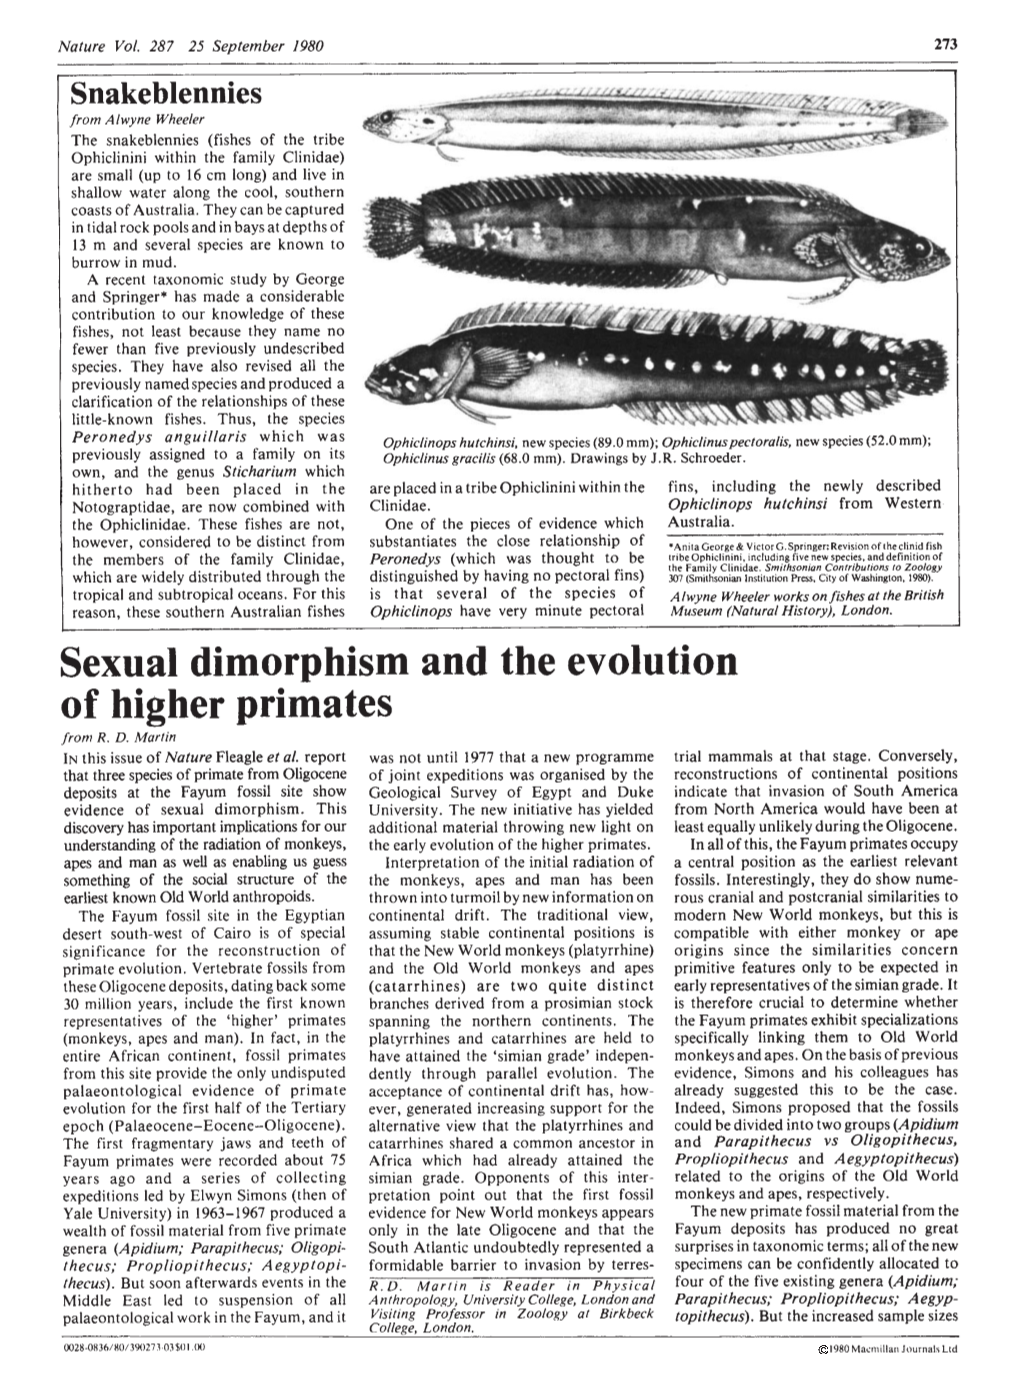 Sexual Dimorphism and the Evolution of Higher Primates from R